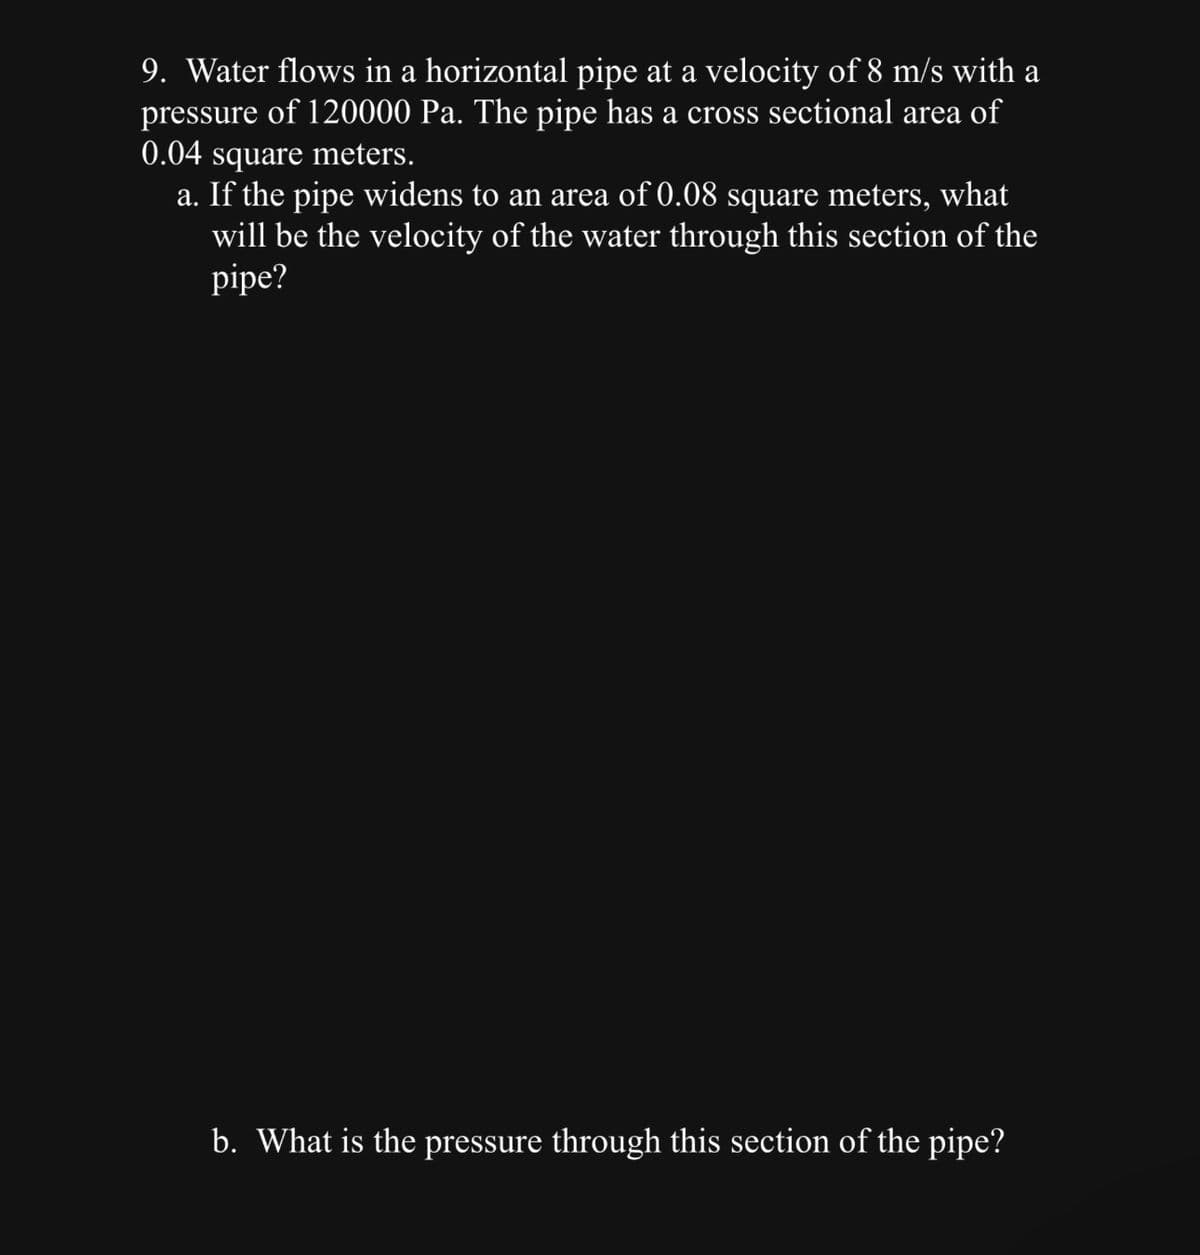 9. Water flows in a horizontal pipe at a velocity of 8 m/s with a
pressure of 120000 Pa. The pipe has a cross sectional area of
0.04 square meters.
a. If the pipe widens to an area of 0.08 square meters, what
will be the velocity of the water through this section of the
pipe?
b. What is the pressure through this section of the pipe?